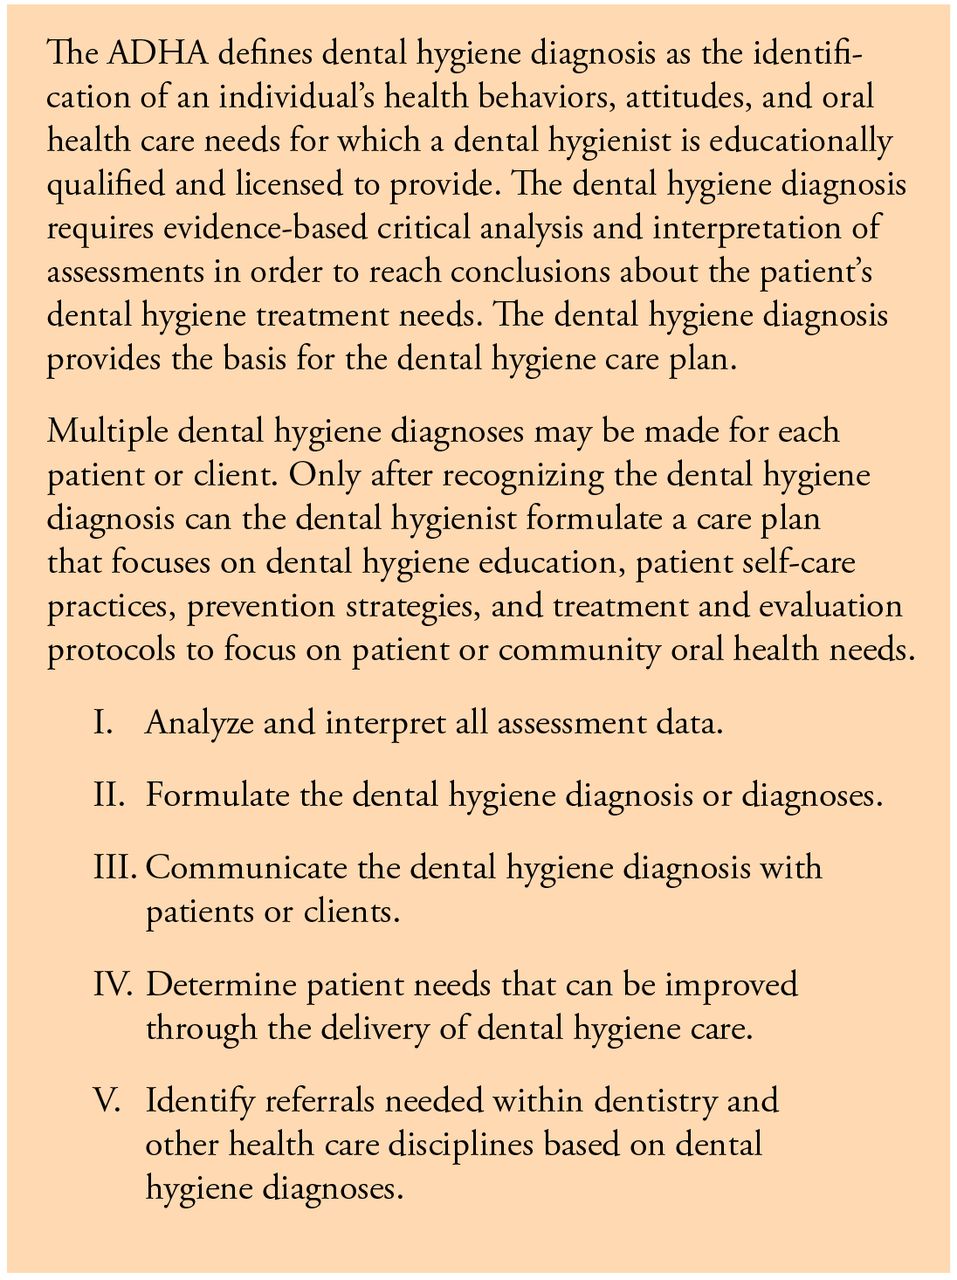 research paper topics for dental hygiene